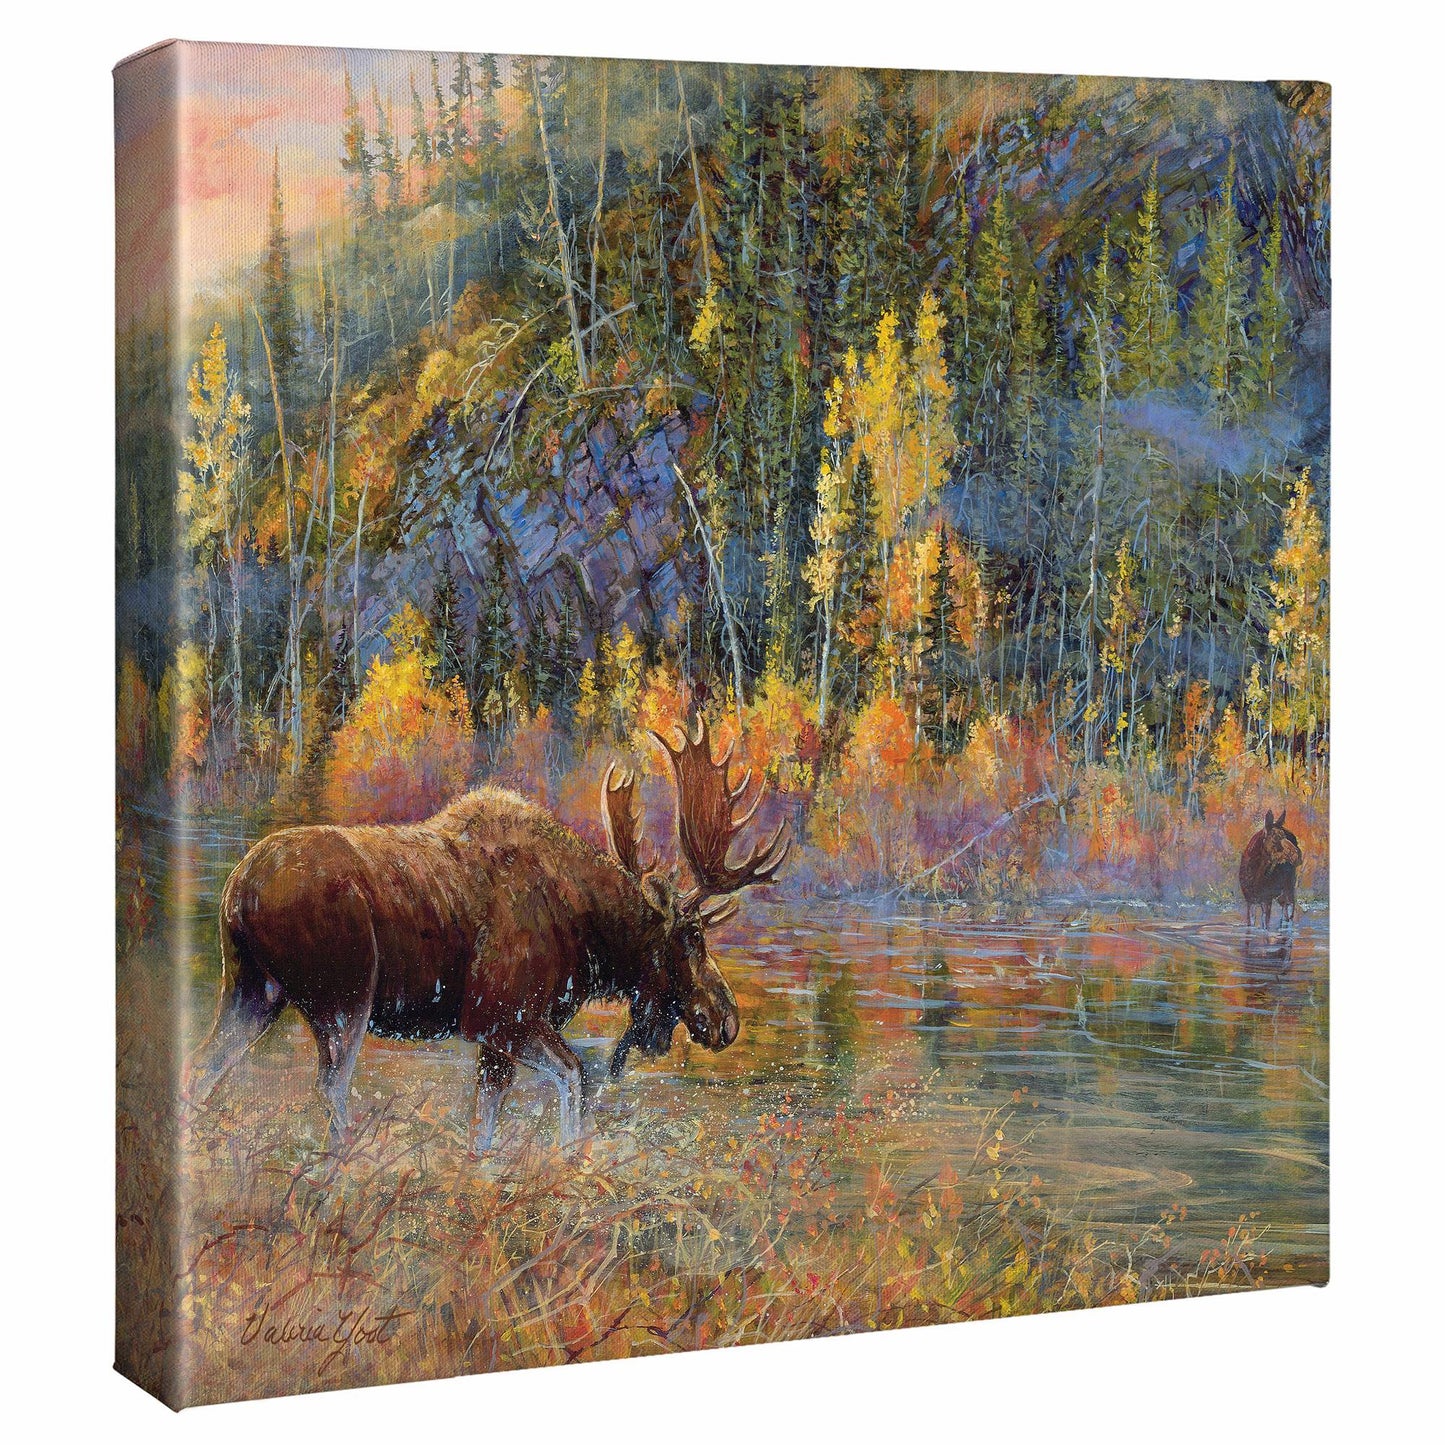 Rituals of the Fall Gallery Wrapped Canvas - Wild Wings